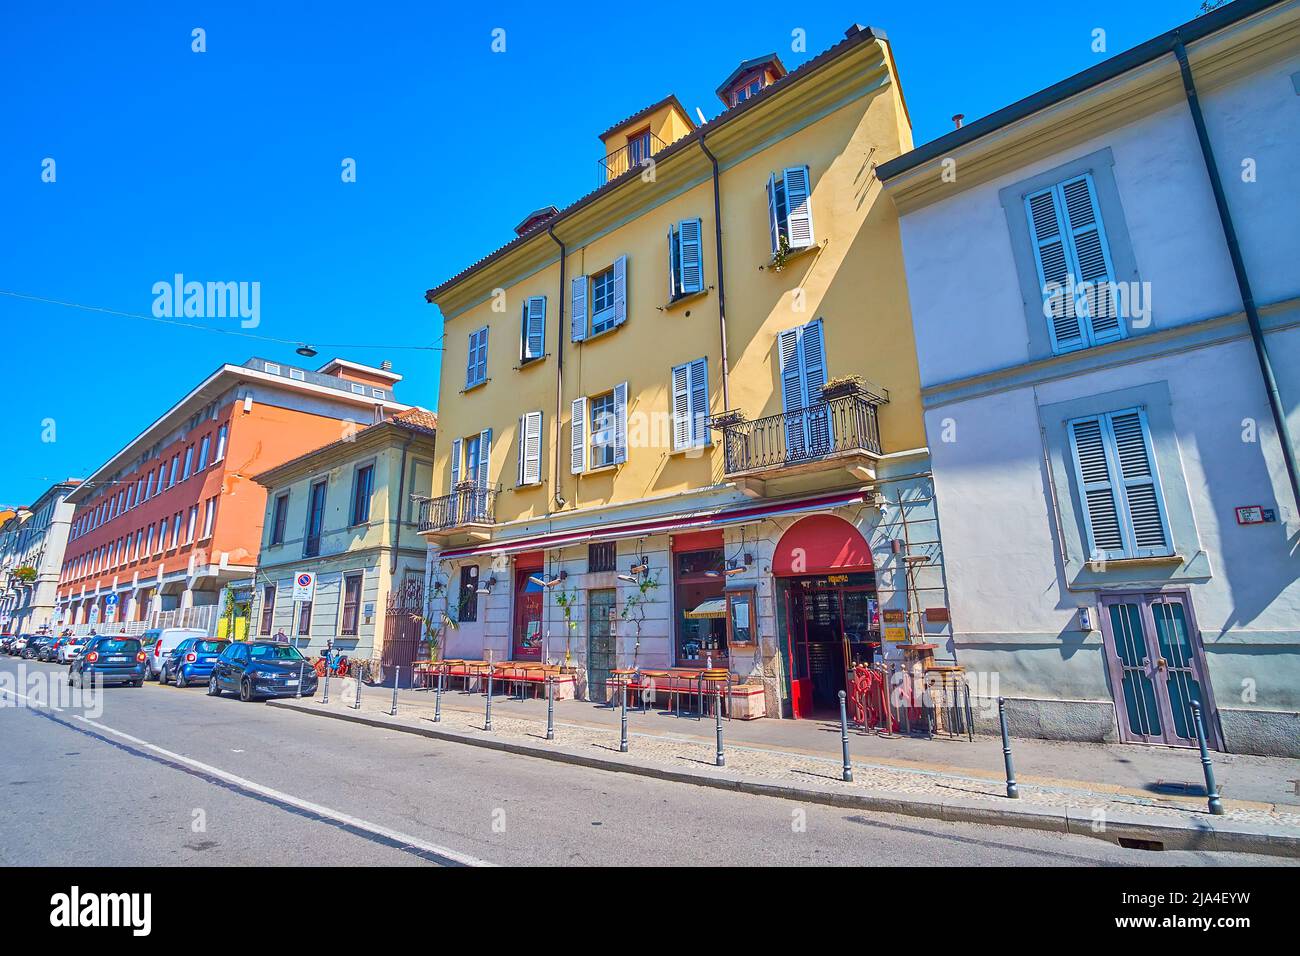 MILAN, ITALY - APRIL 5, 2022: Via San Marco street with numerous restaurants and cafe in the heart of Brera district, on April 5 in Milan, Italy Stock Photo